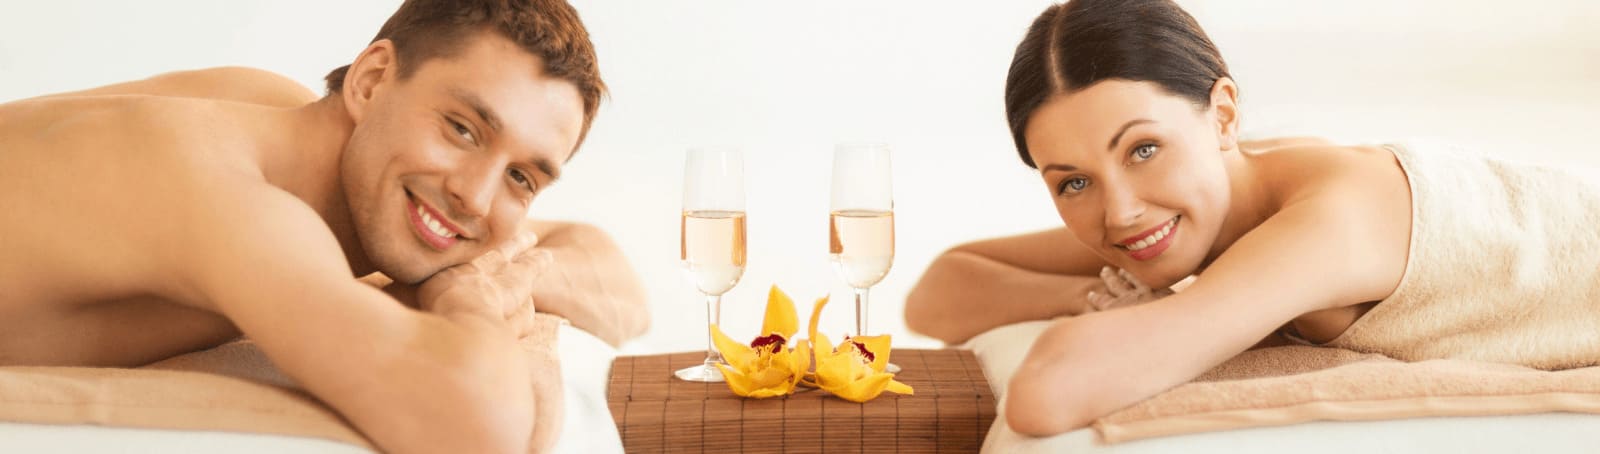 The Benefits of Couple’s Spa Treatments in Bangkok for Romantic Getaways